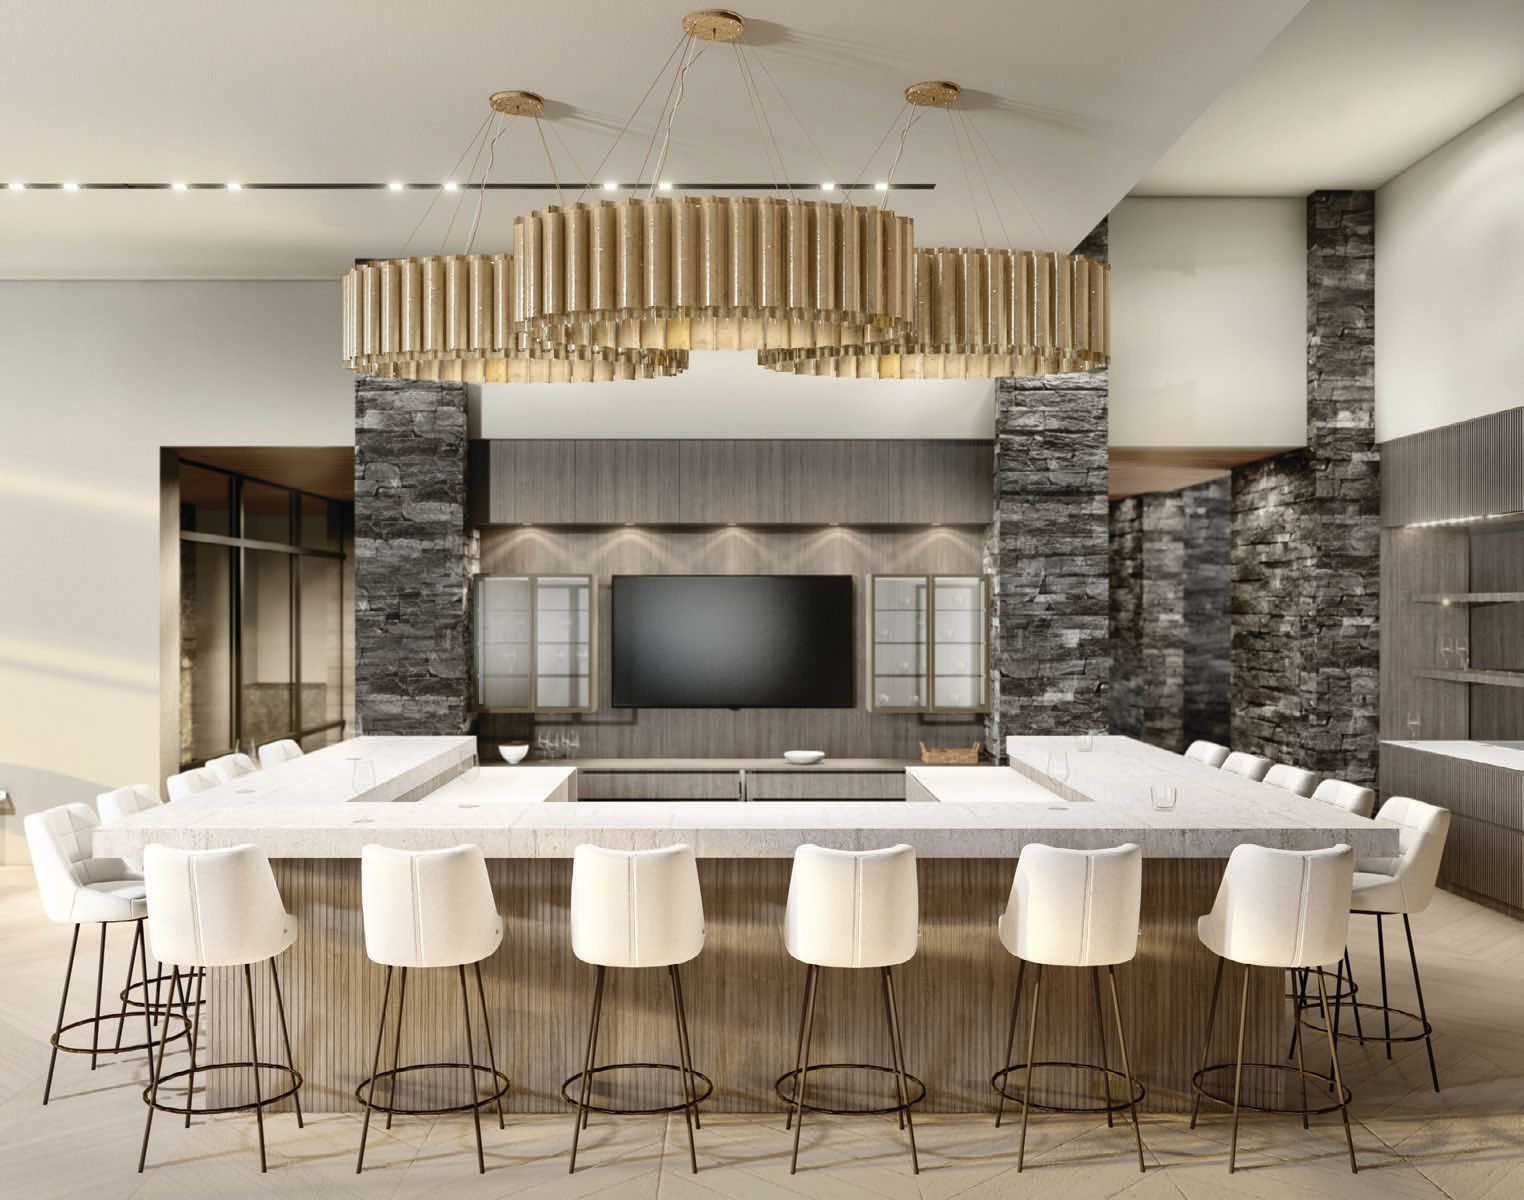 Multiple entertaining areas are found in the home RENDERINGS COURTESY OF RUSS LYON SOTHEBY’S INTERNATIONAL REALTY